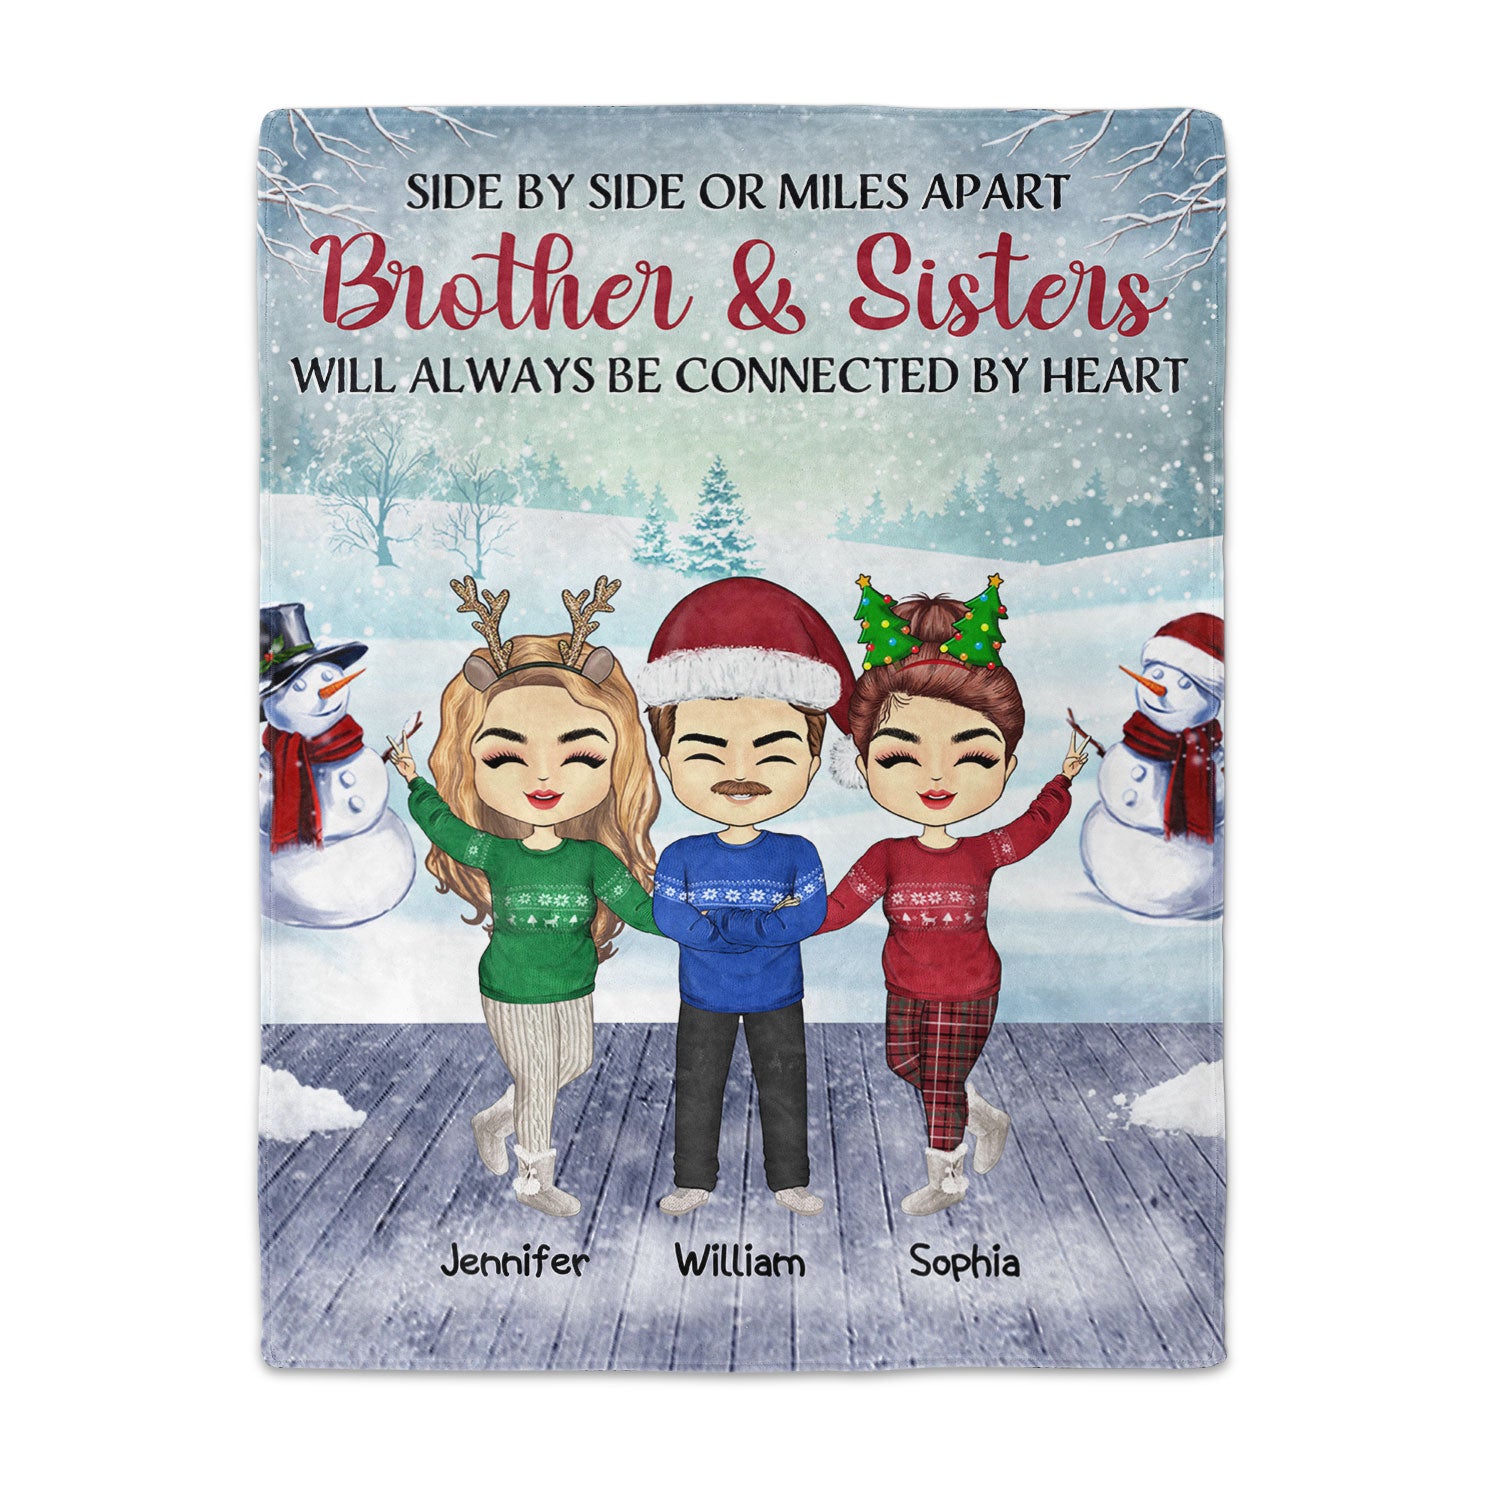 Side By Side Or Miles Apart Sisters And Brothers, Best Friends - Christmas Gift - Personalized Custom Fleece Blanket